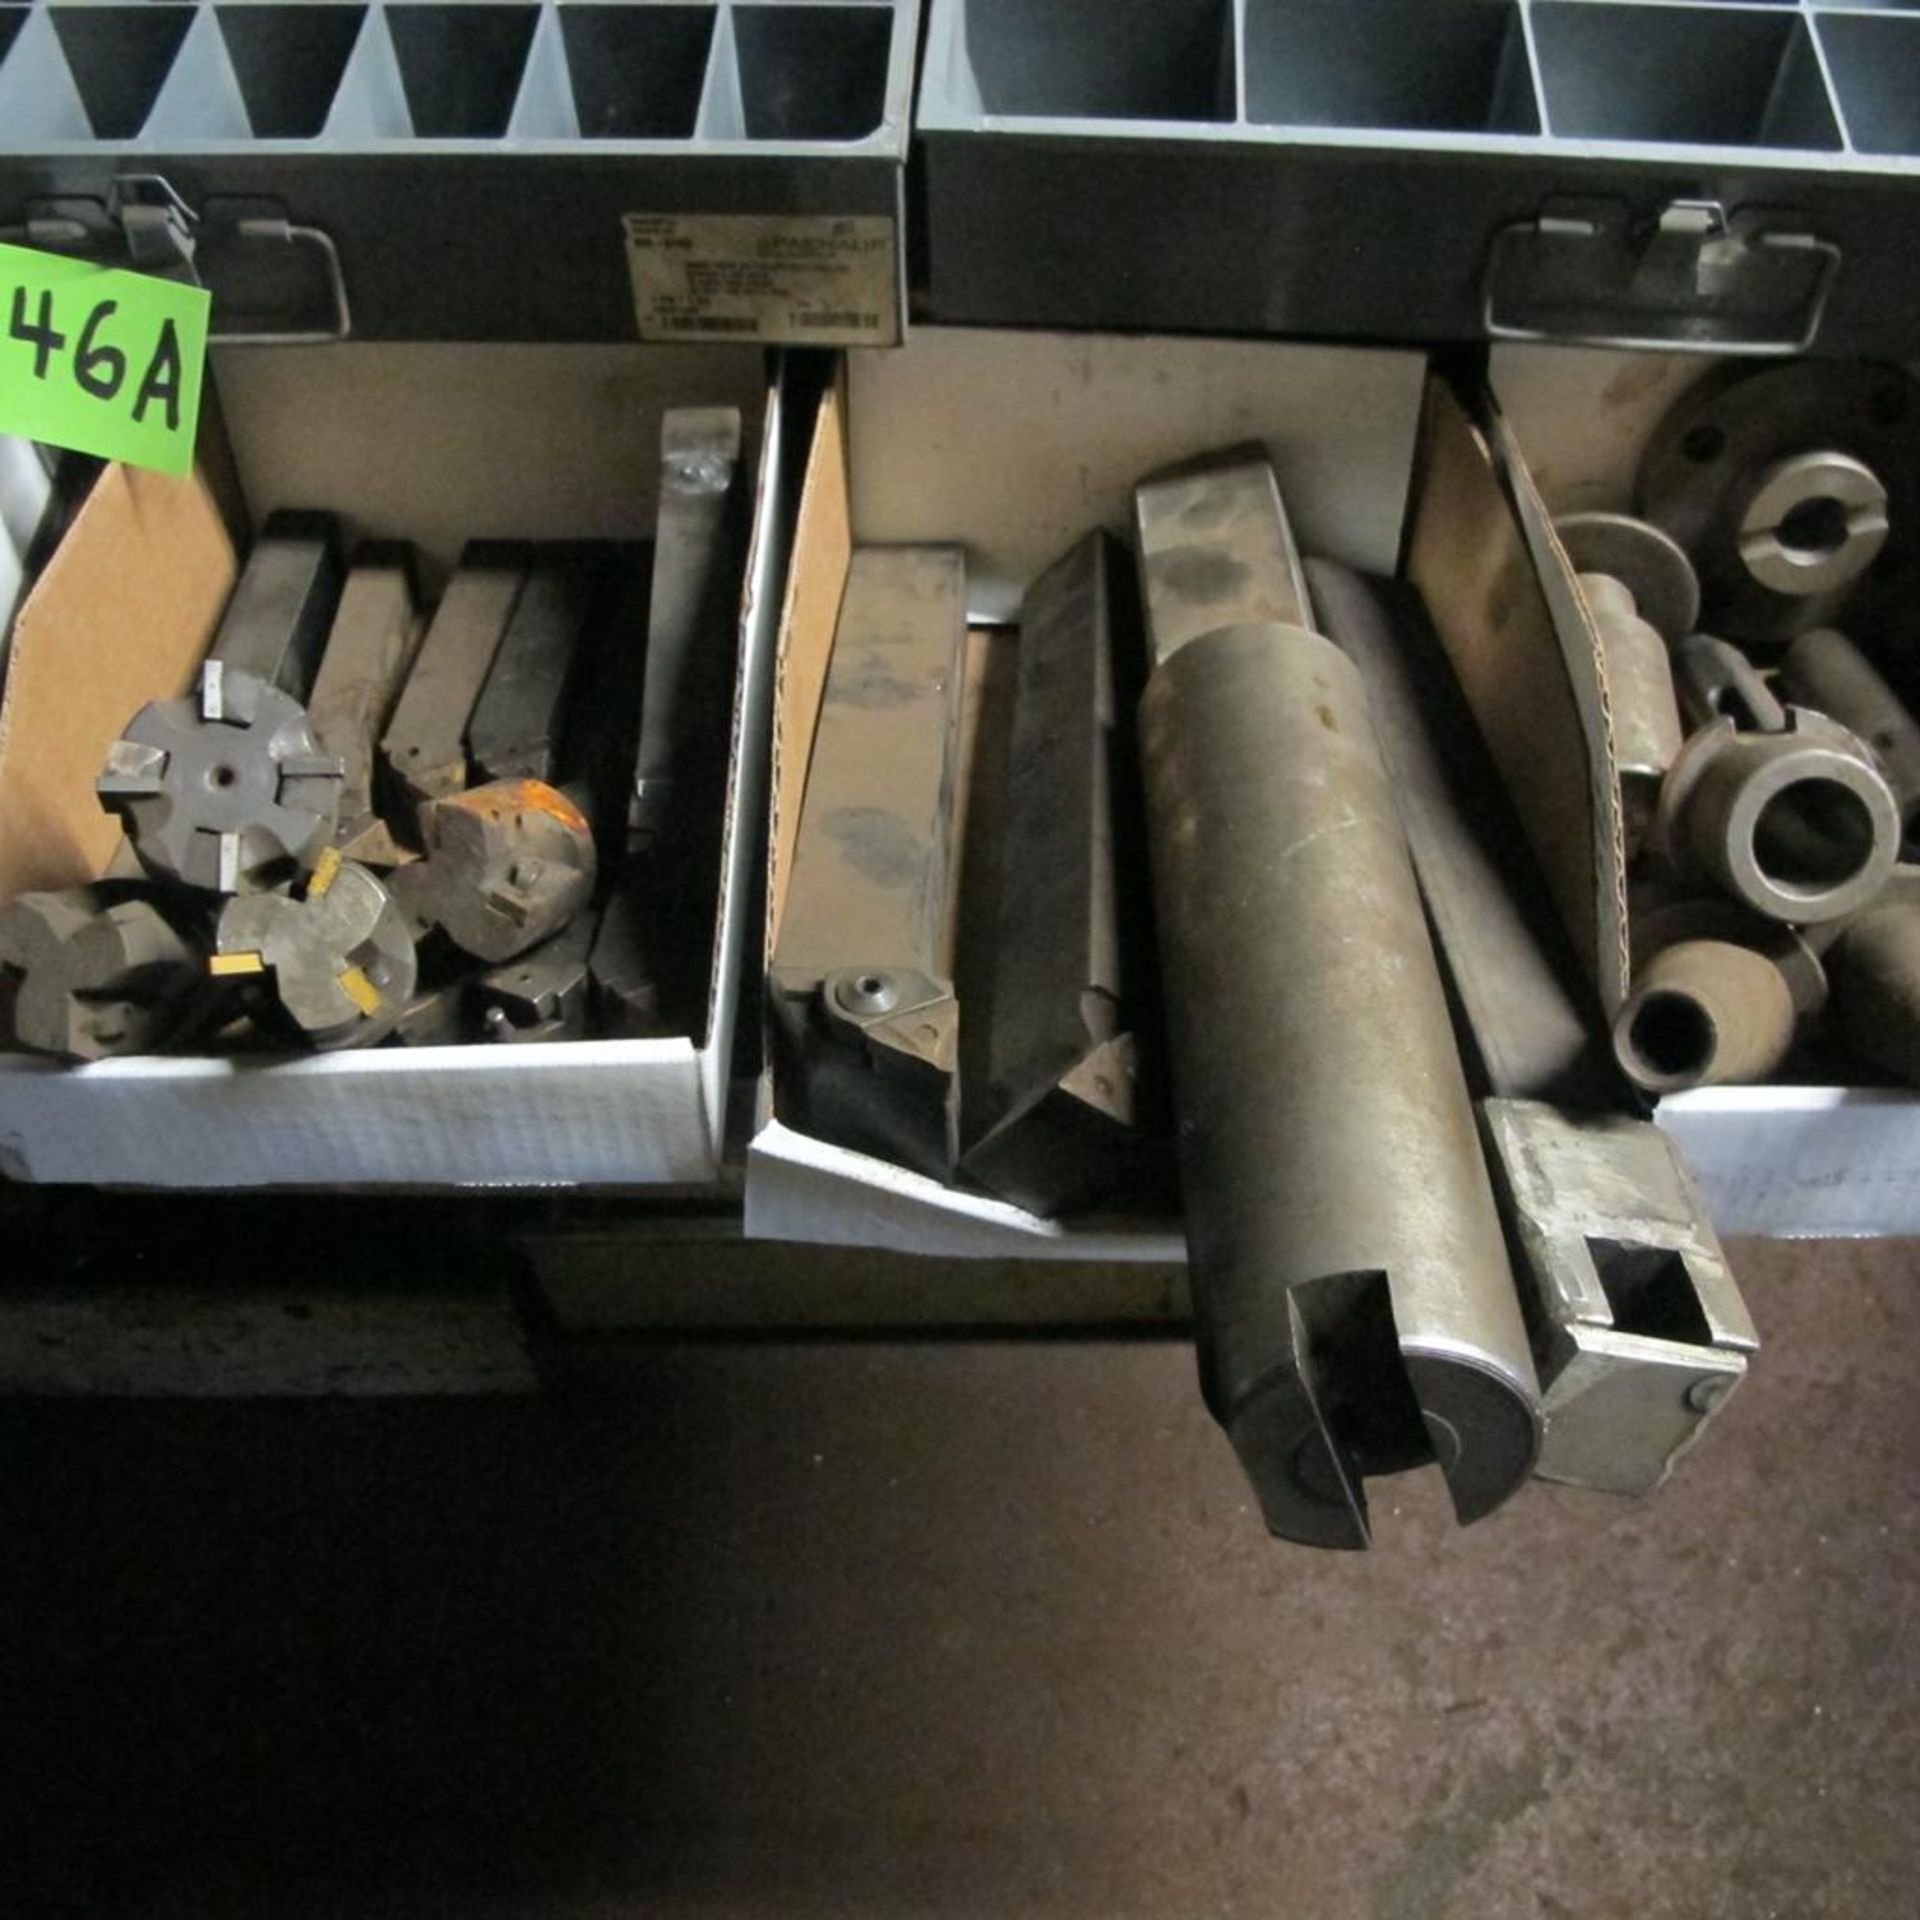 LOT OF 6 BOXES OF CARBIDE CUTTERS, CARBIDE CUTTER BARS, TOOL HOLDERS, LATHE TOOLING (MAIN BLDG) - Image 4 of 4